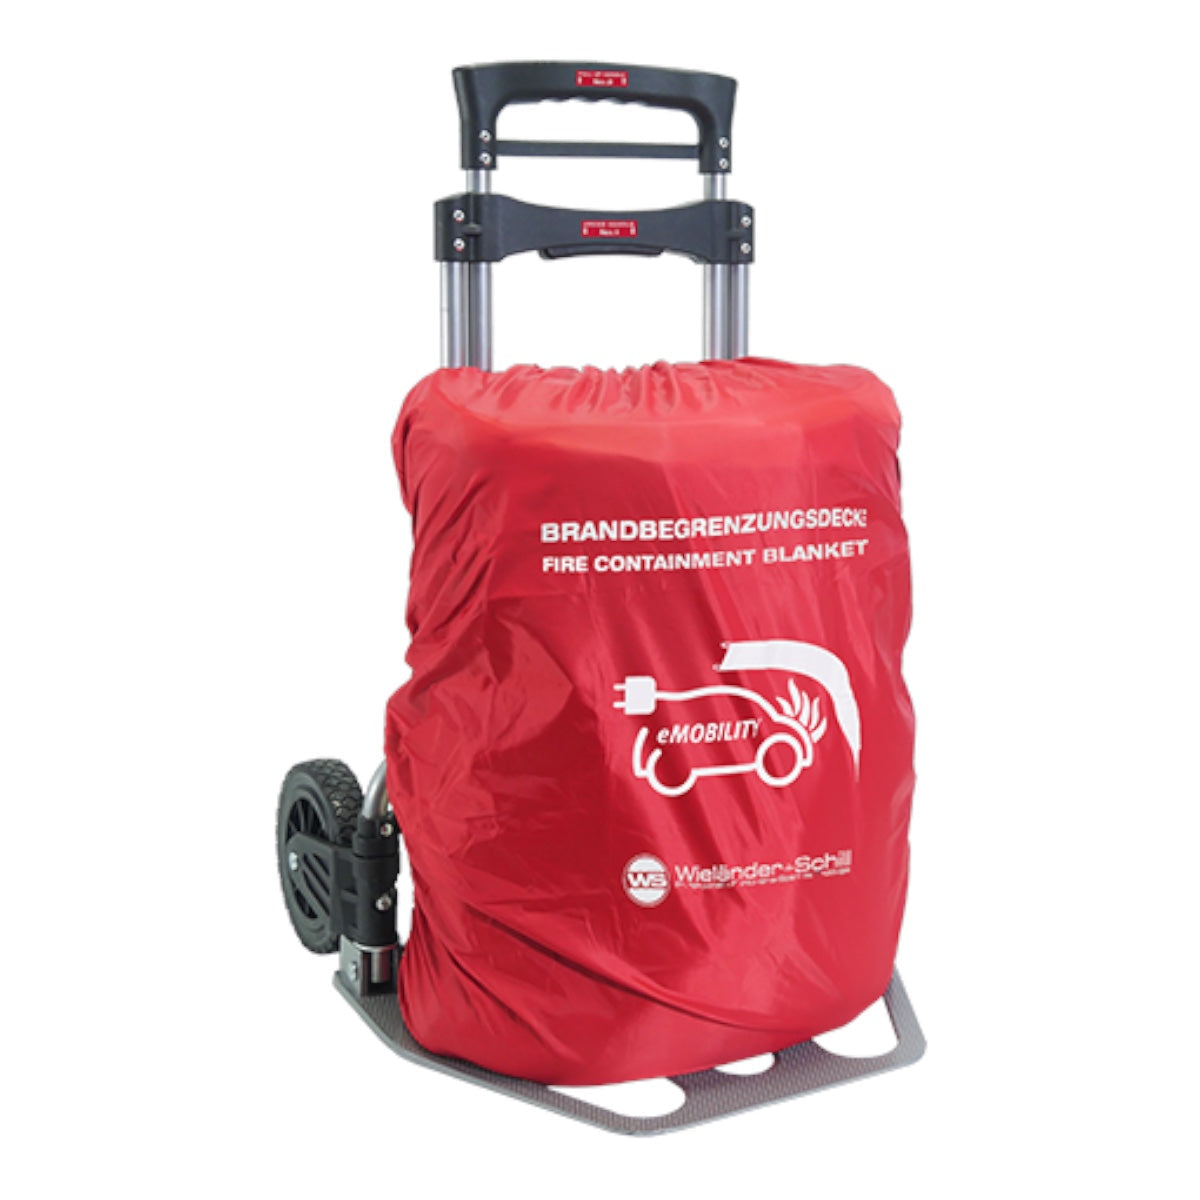 Fire containment ceiling WS 1100 (A1) including trolley and protective cover